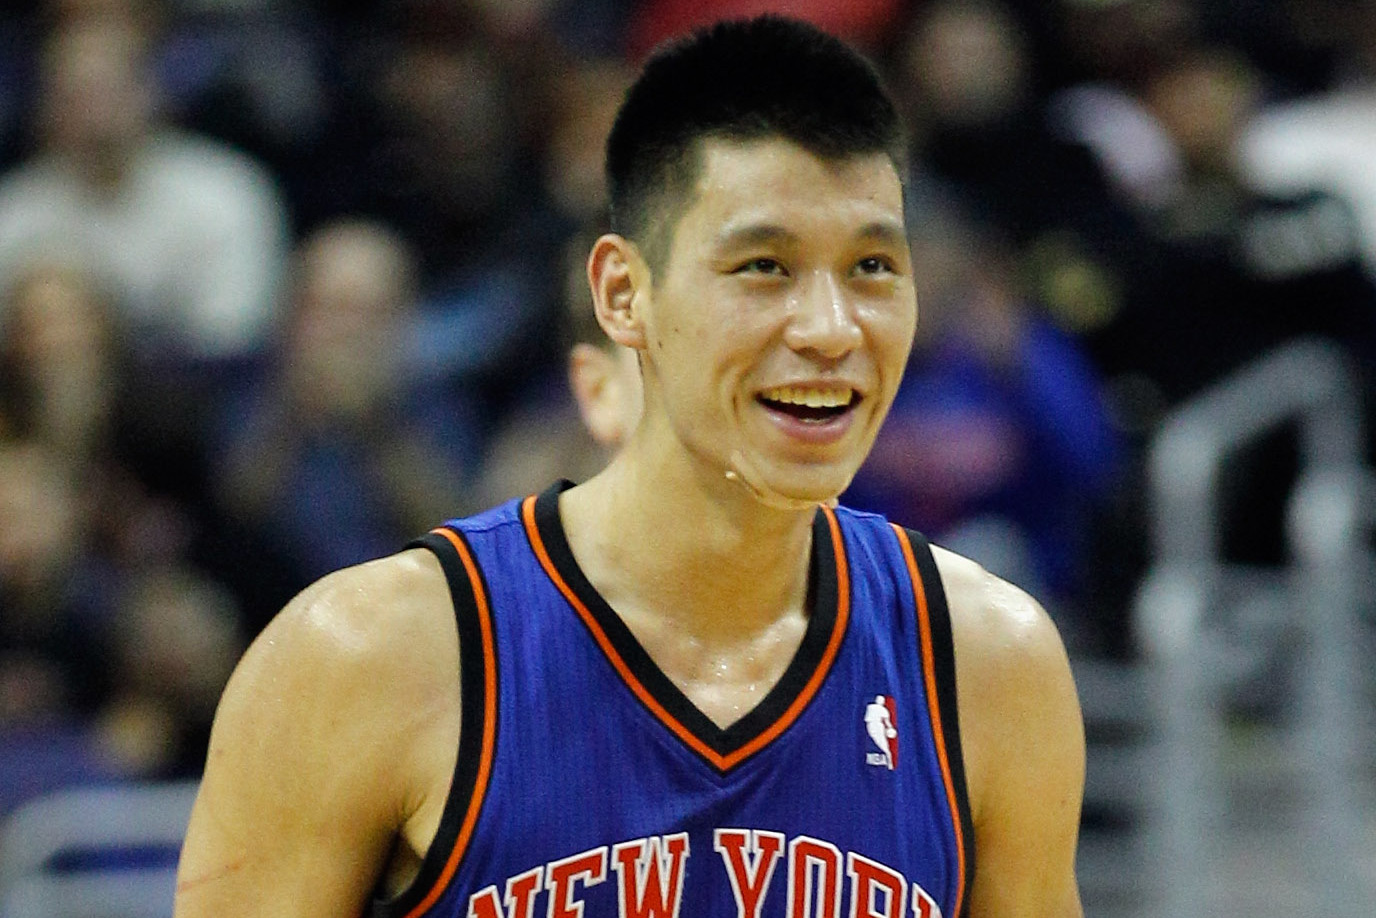 NY Knicks' Jeremy Lin hits game-winning 3-pointer in last second to beat  Toronto Raptors 90-87 for sixth straight win – New York Daily News